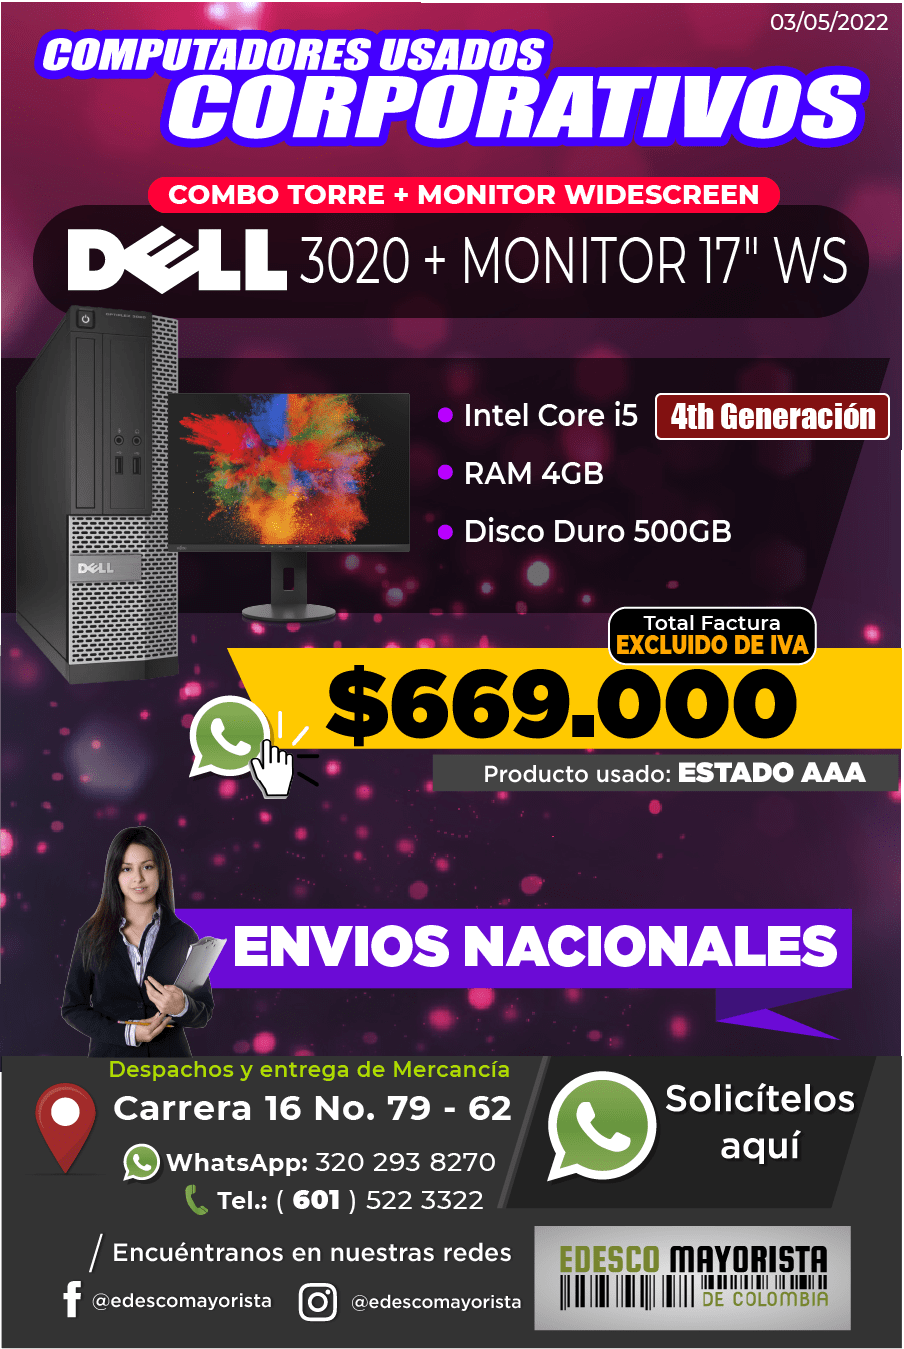 Combo Torre DELL 3020 + Monitor 17